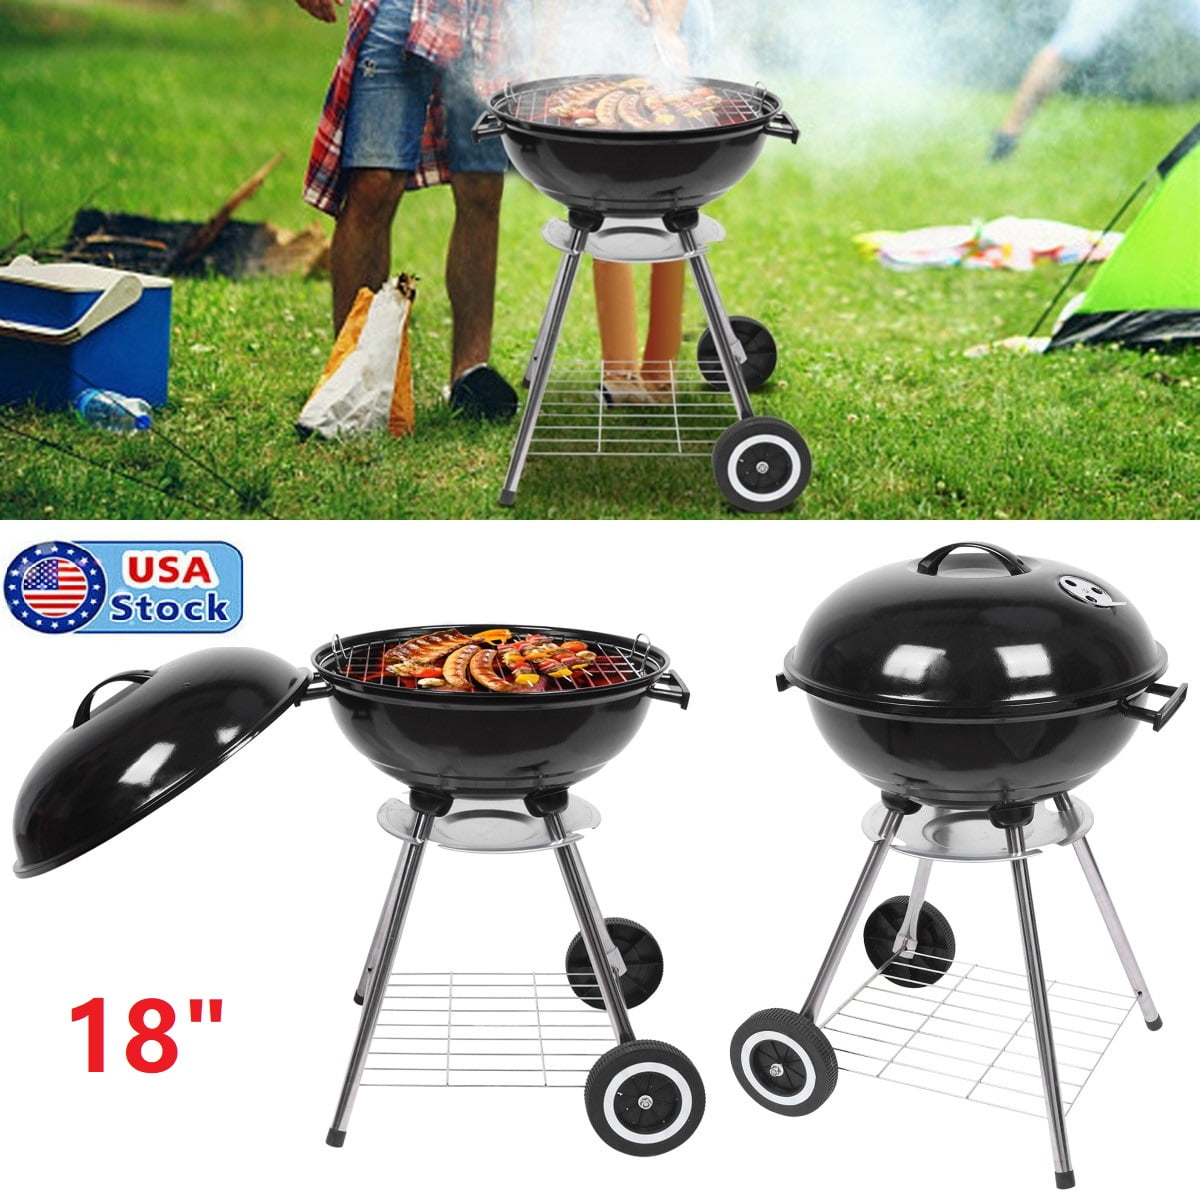 Polijsten innovatie rivier Atotoa 18 Inch Charcoal Grill Bundle Chimney Starter,23.6" H Portable  Charcoal Grill For Outdoor Camping Cooking Barbecue,Black - Walmart.com